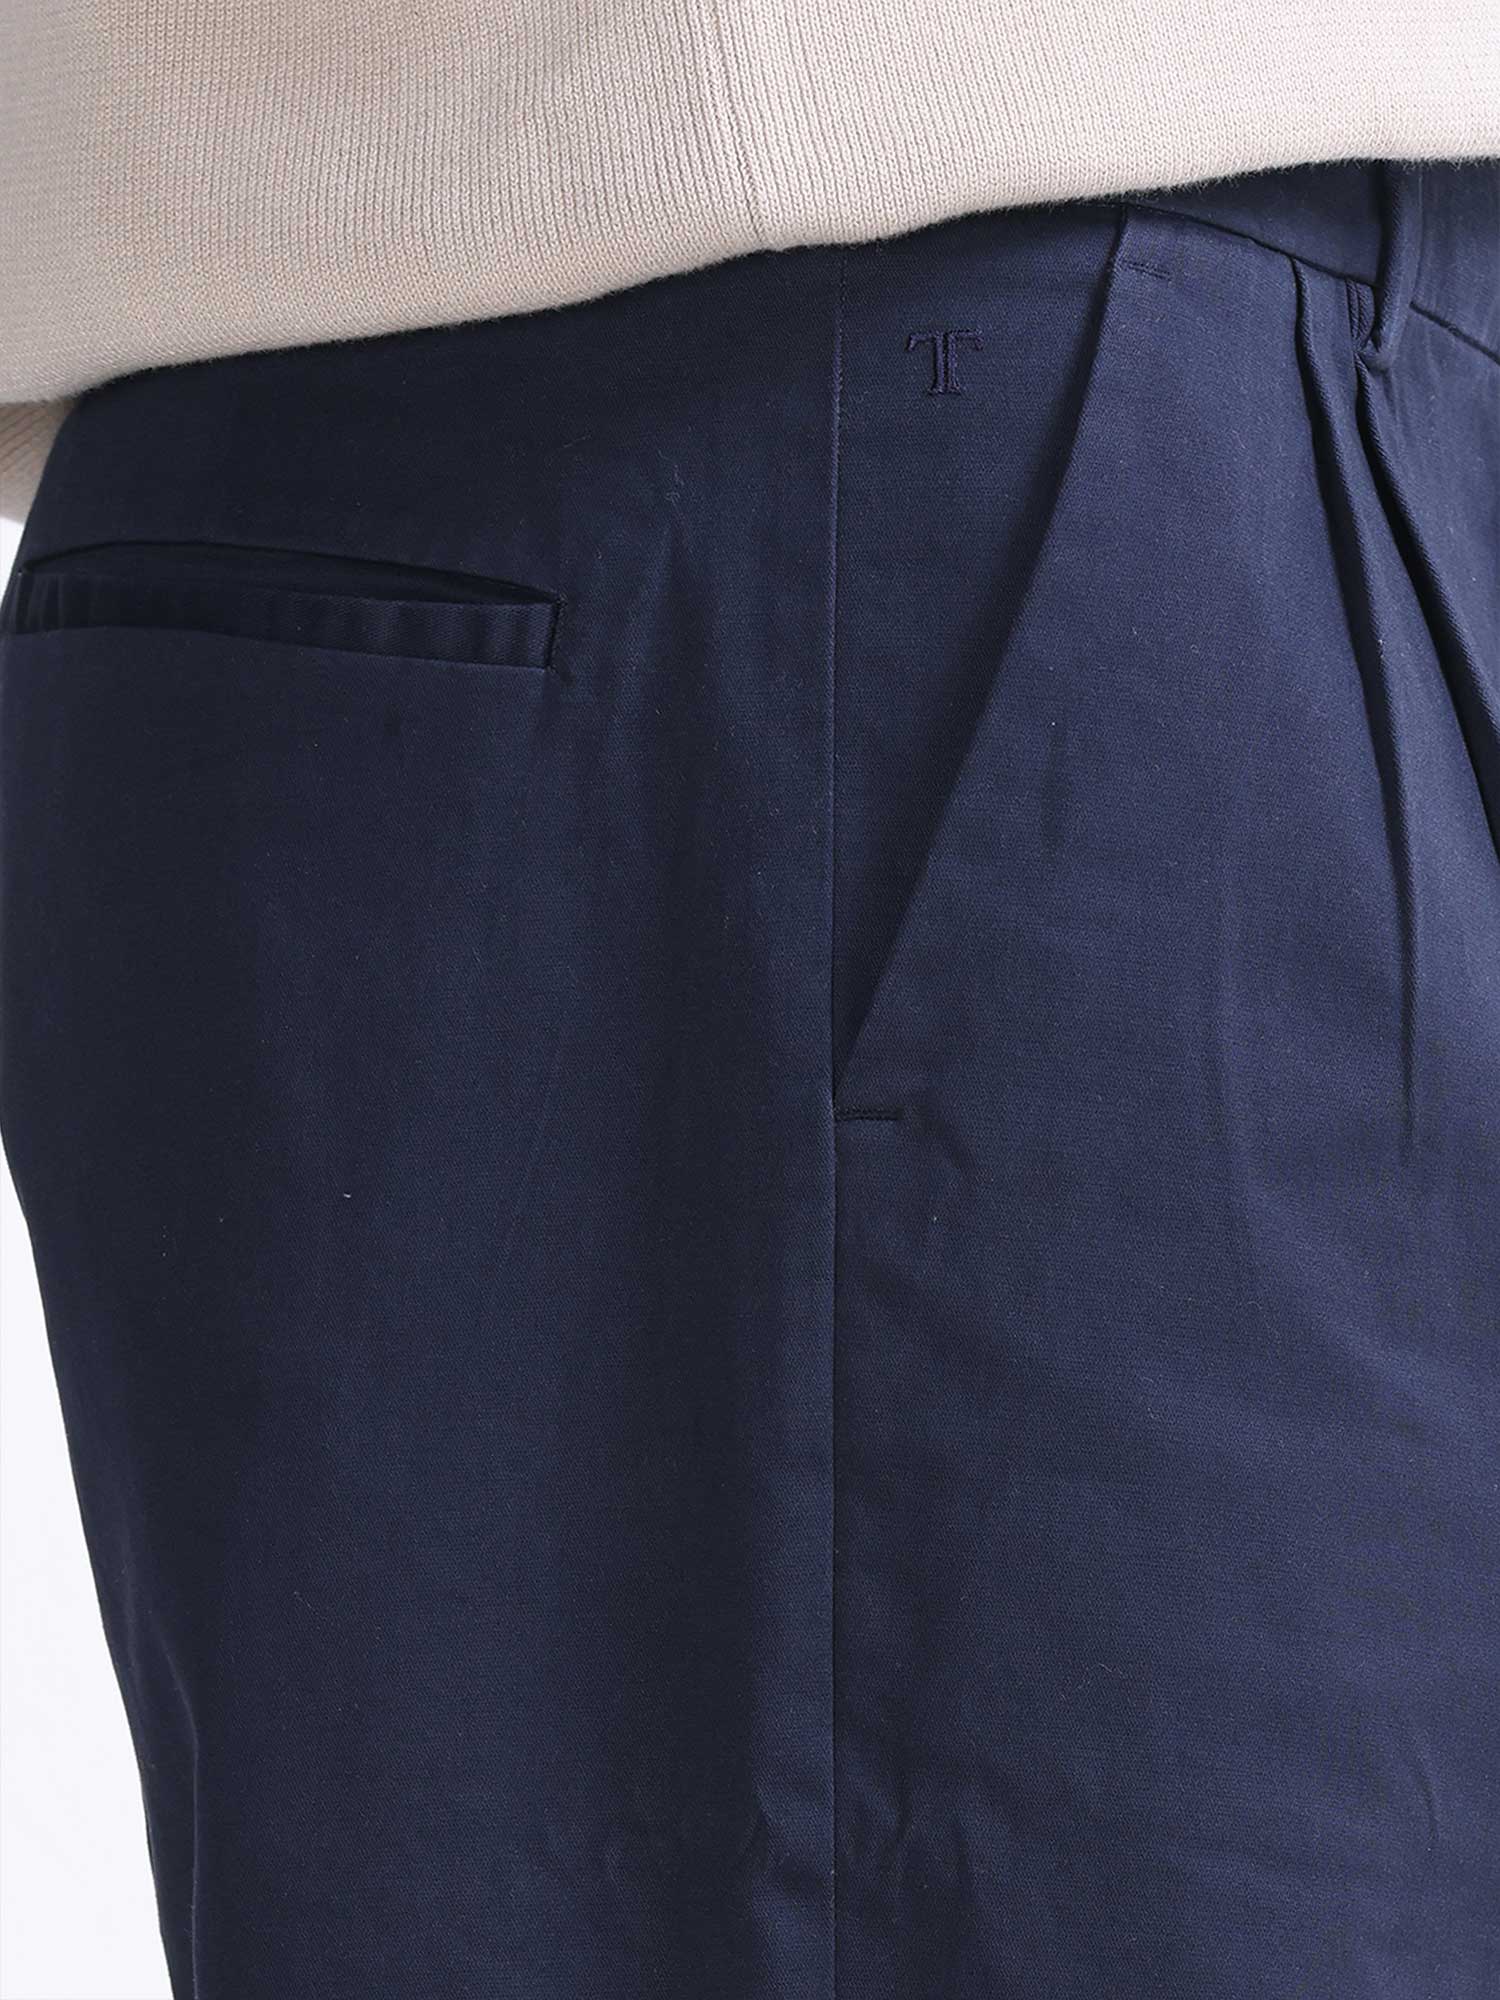 Navy Pleated Braddon Pants in Circular Wool Flannel | SUITSUPPLY US